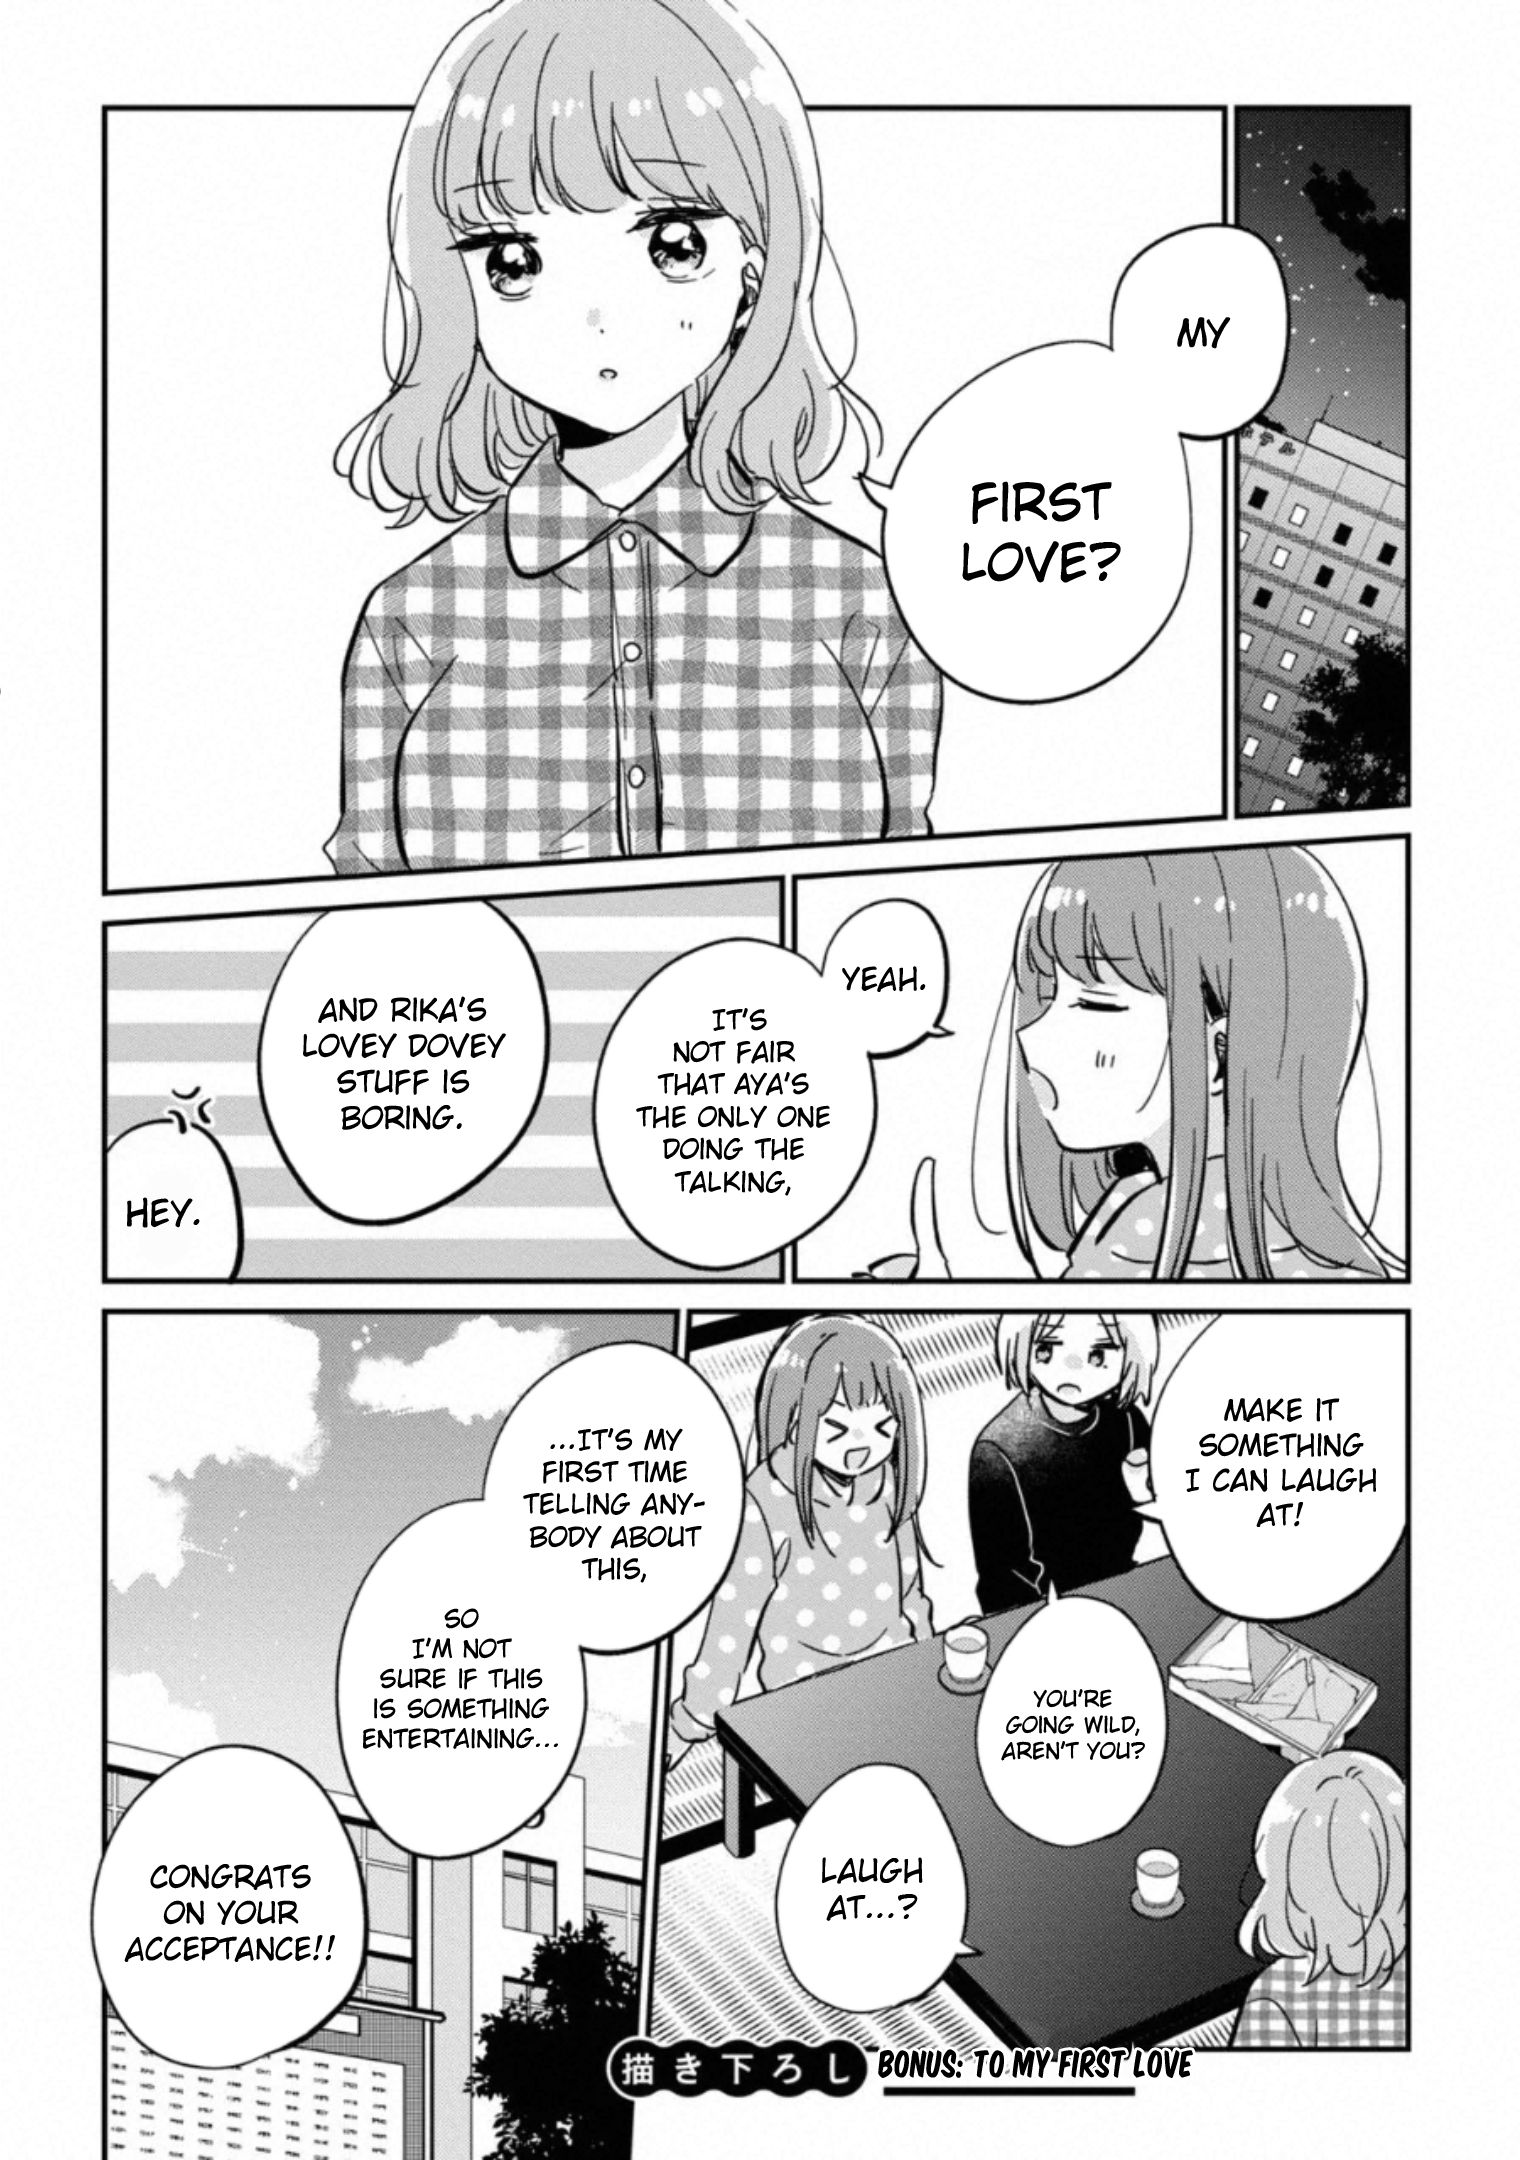 It's Not Meguro-san's First Time chapter 30.5 page 2